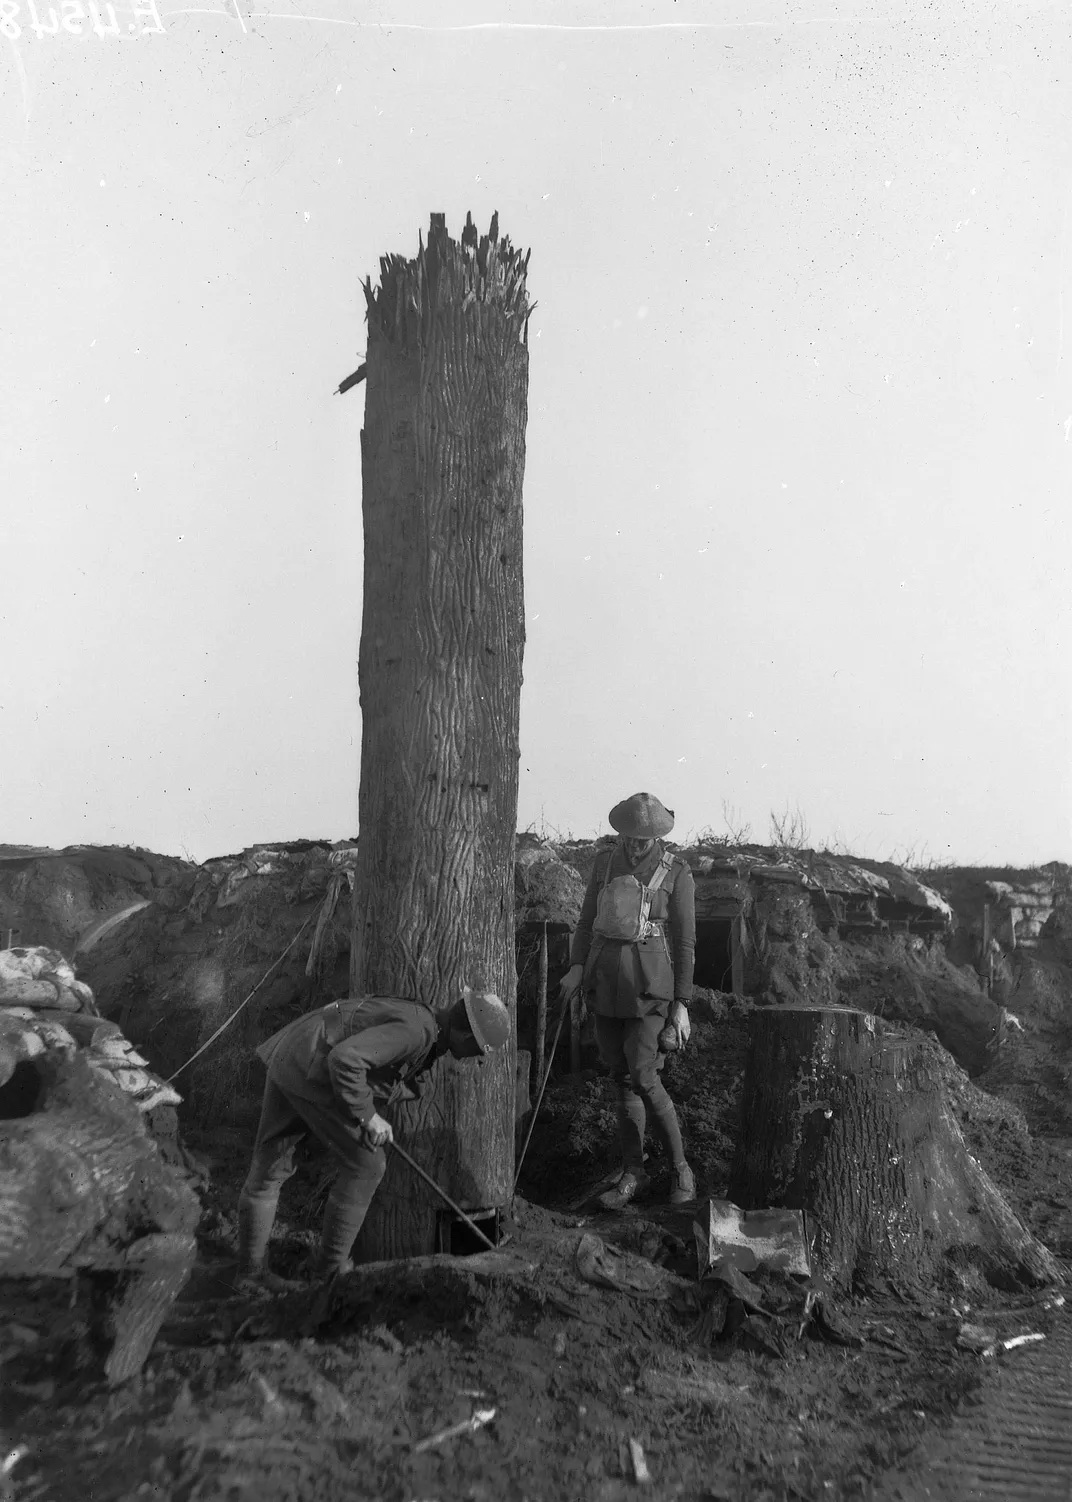 Fake Spy Trees Used in WWI